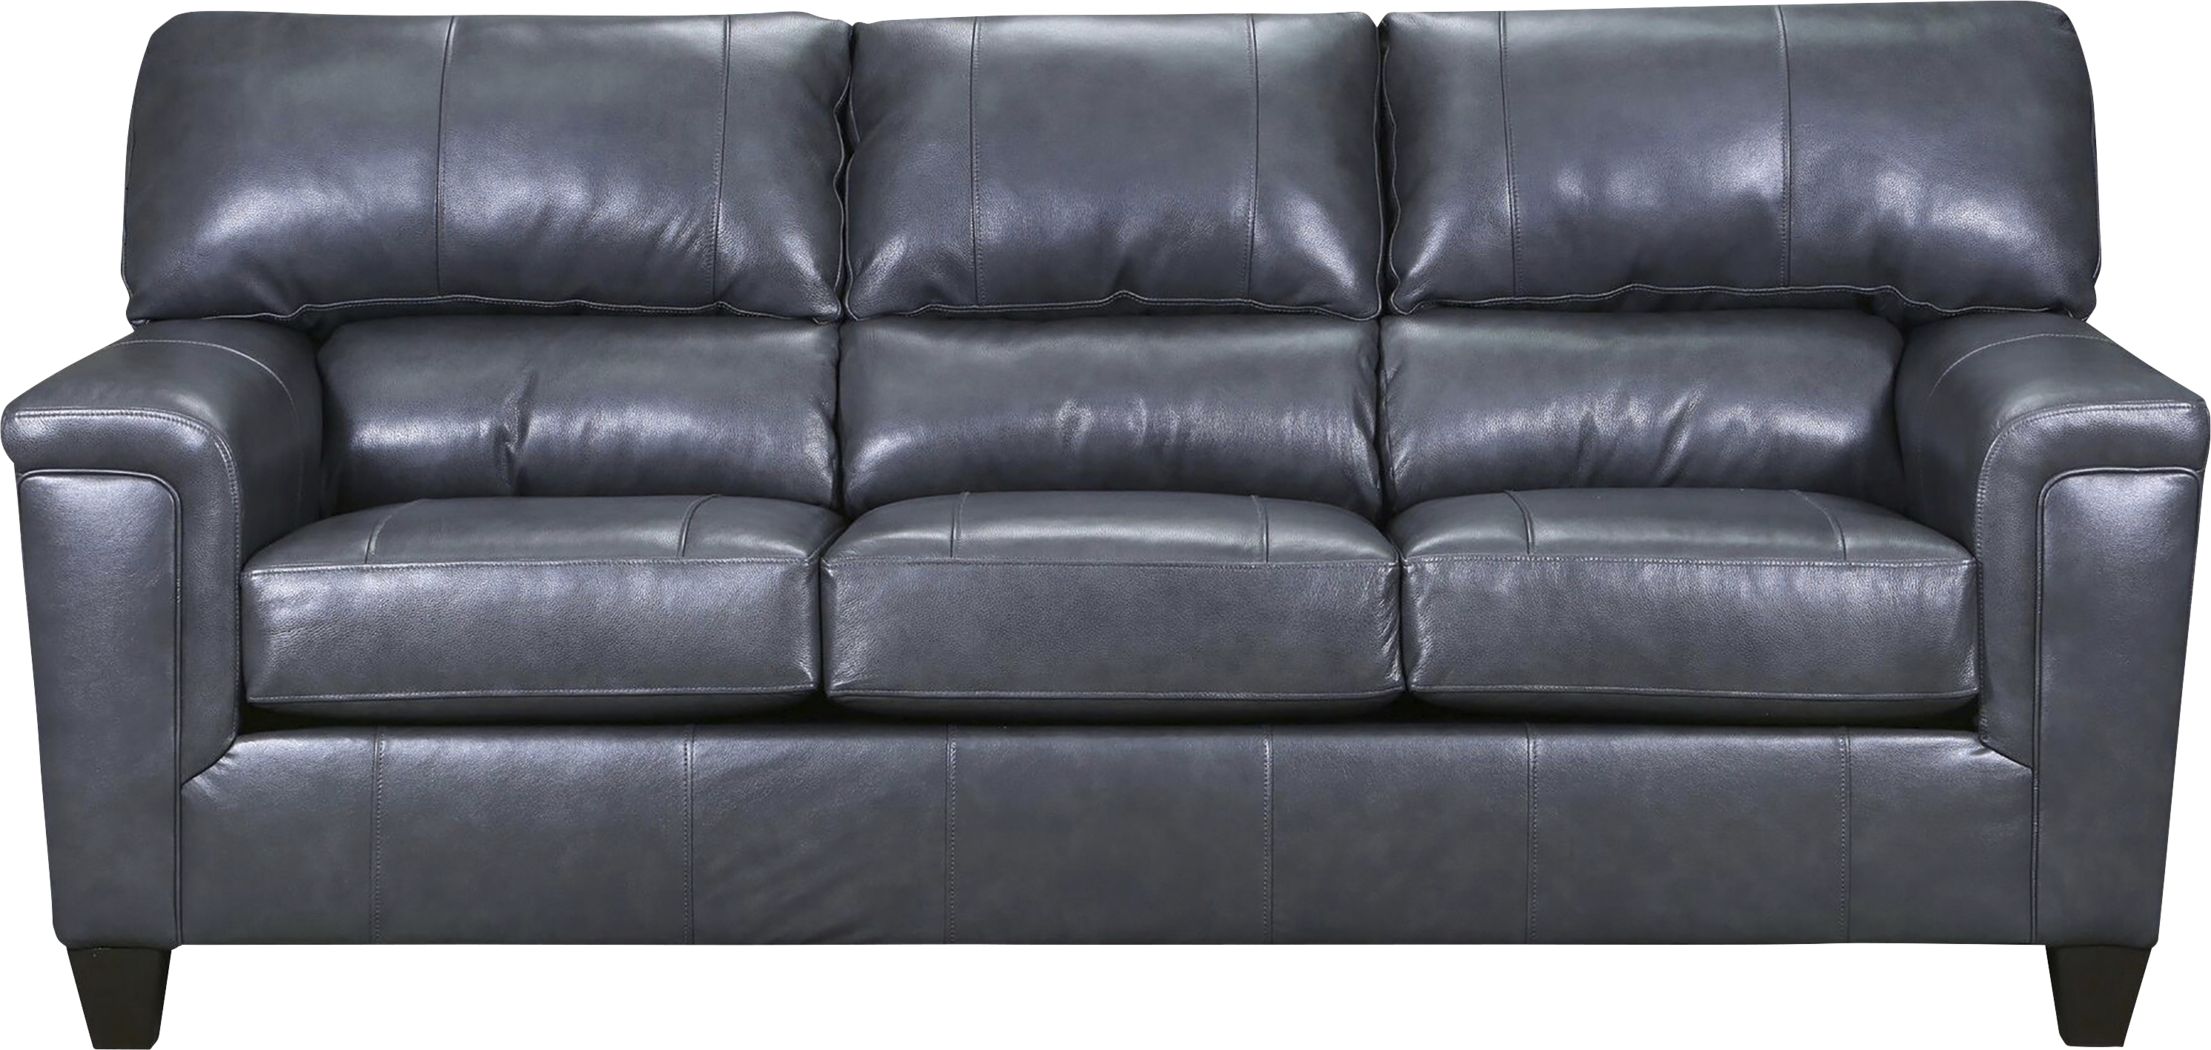 Leather Living Room Furniture, Leather Couch Loveseat And Chair